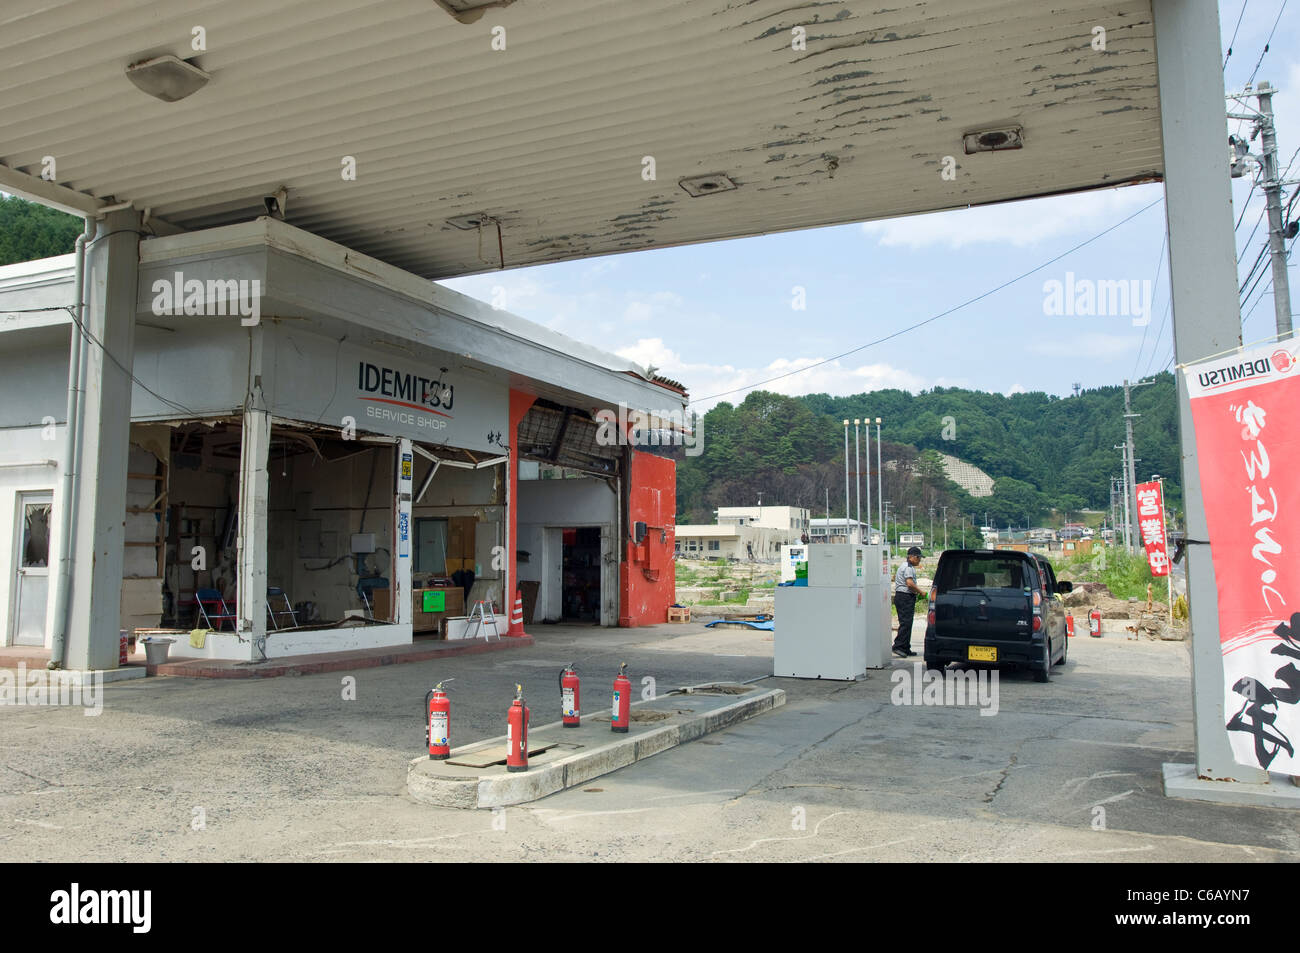 Image of a tsunami damaged but functioning gas station in the town of Taro, Iwate, Japan Stock Photo